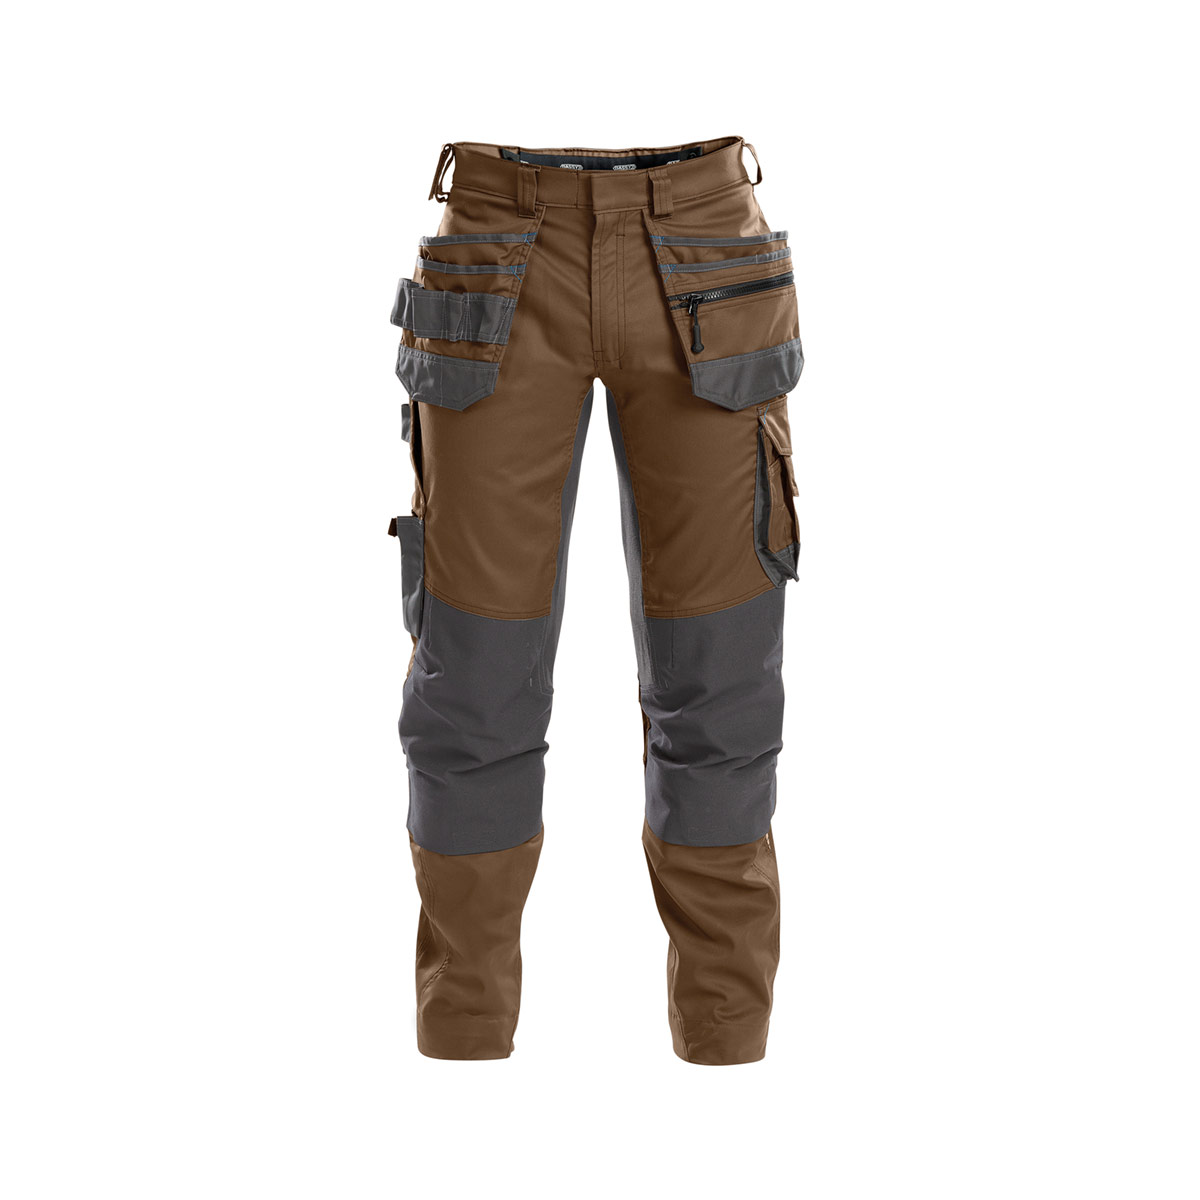 DASSY FLUX work pants with stretch, holster pockets and knee pad pockets